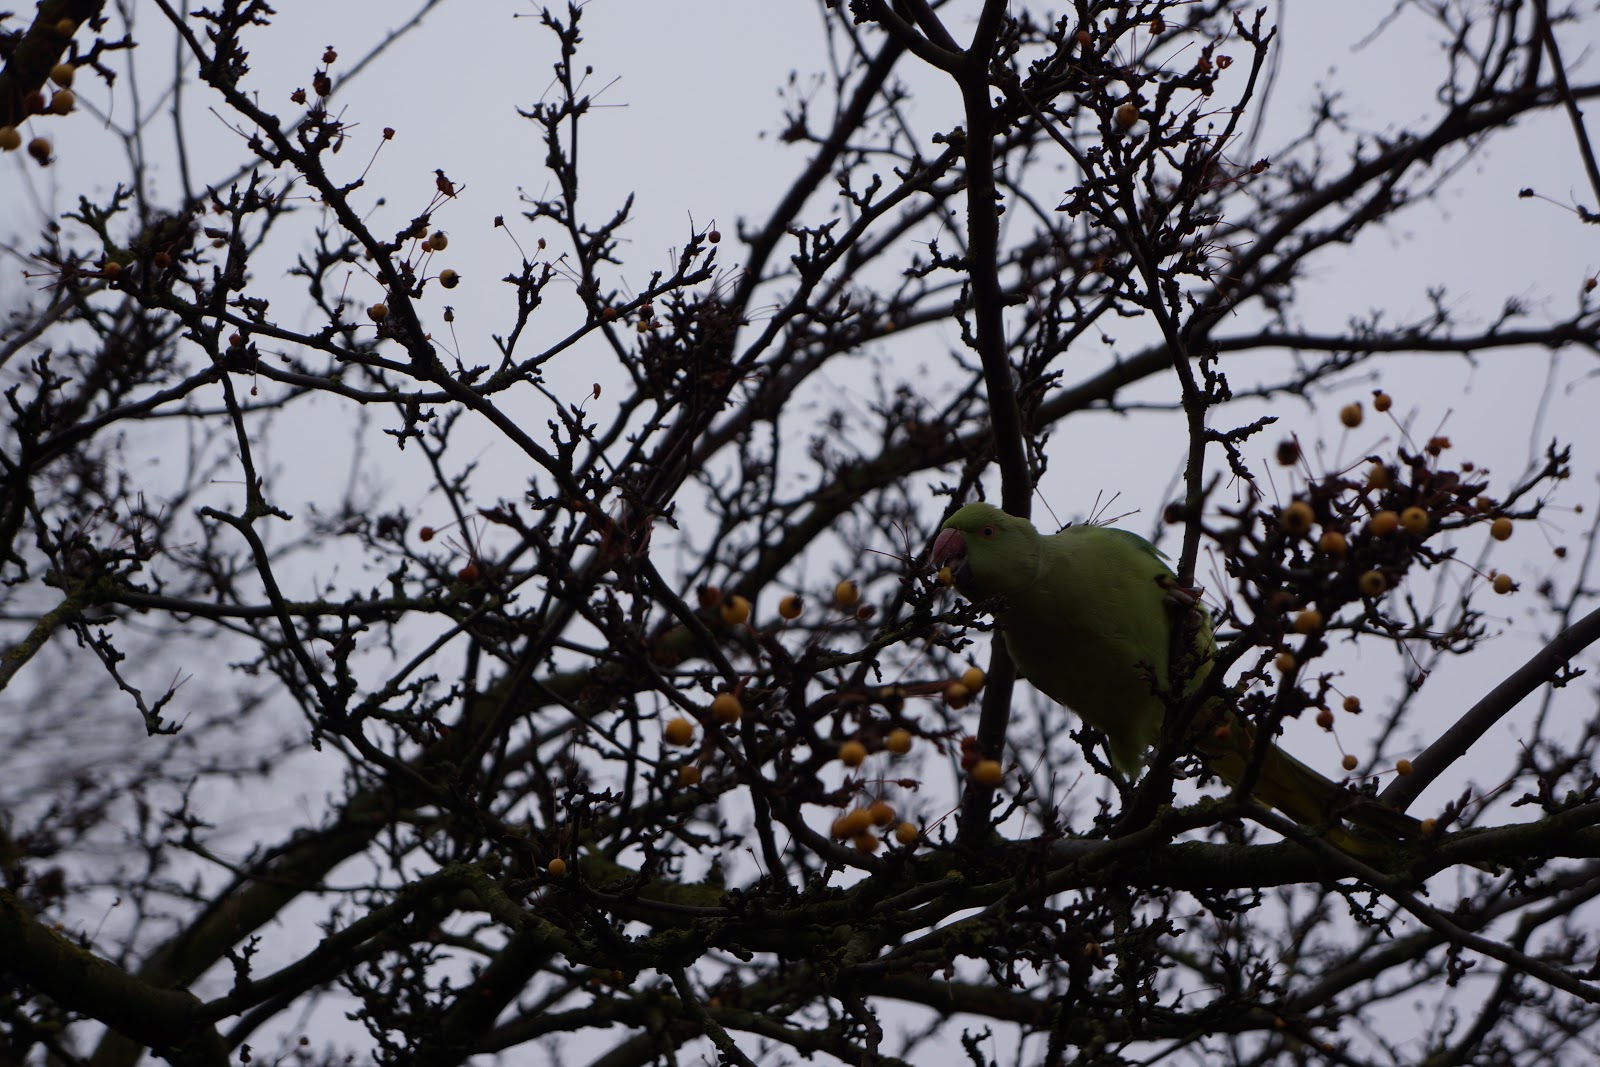 green parrot at hyde park